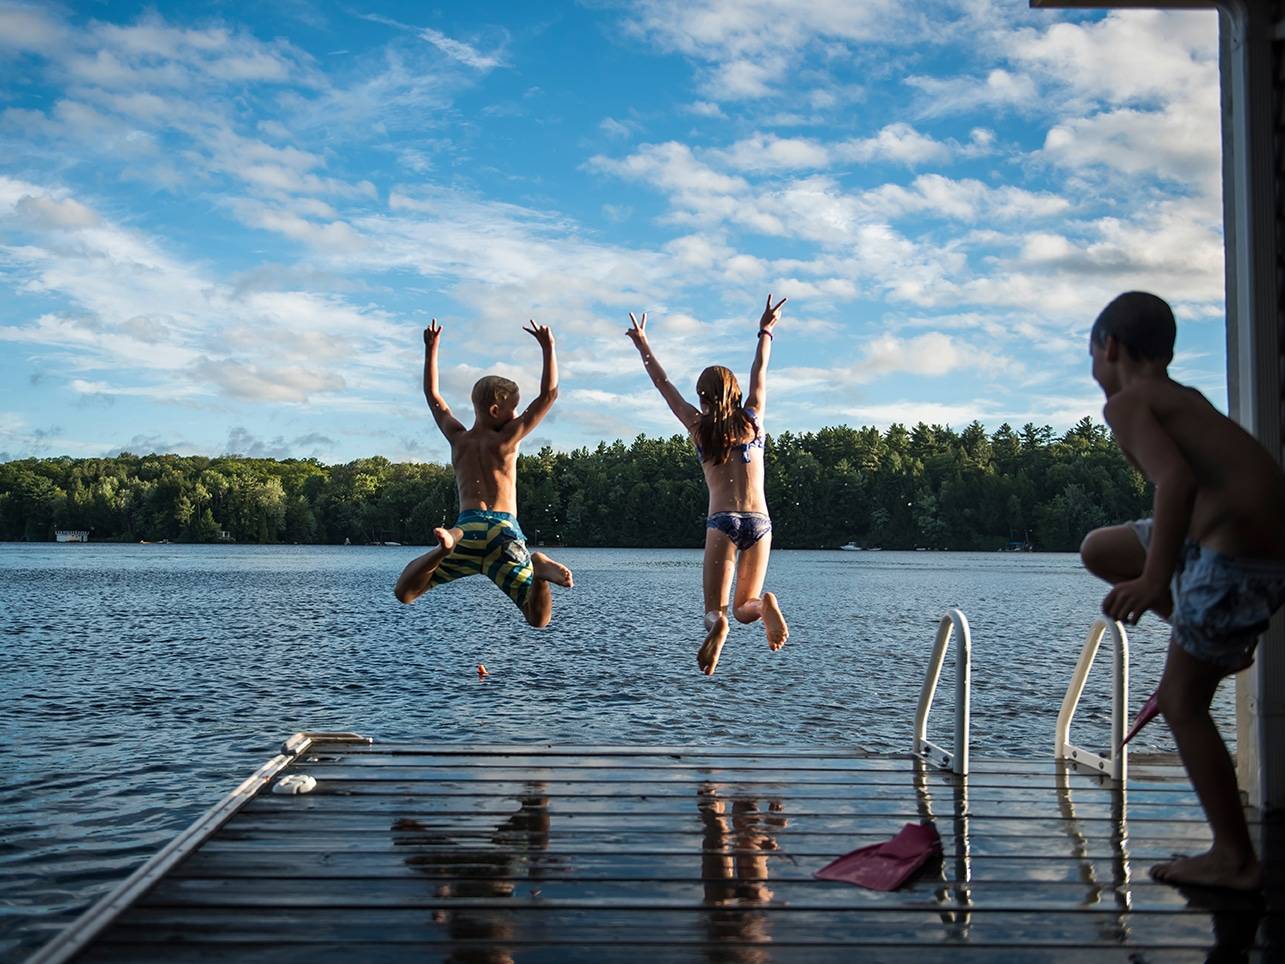 Kids jumping into the lake with their arms thrown up in joy!